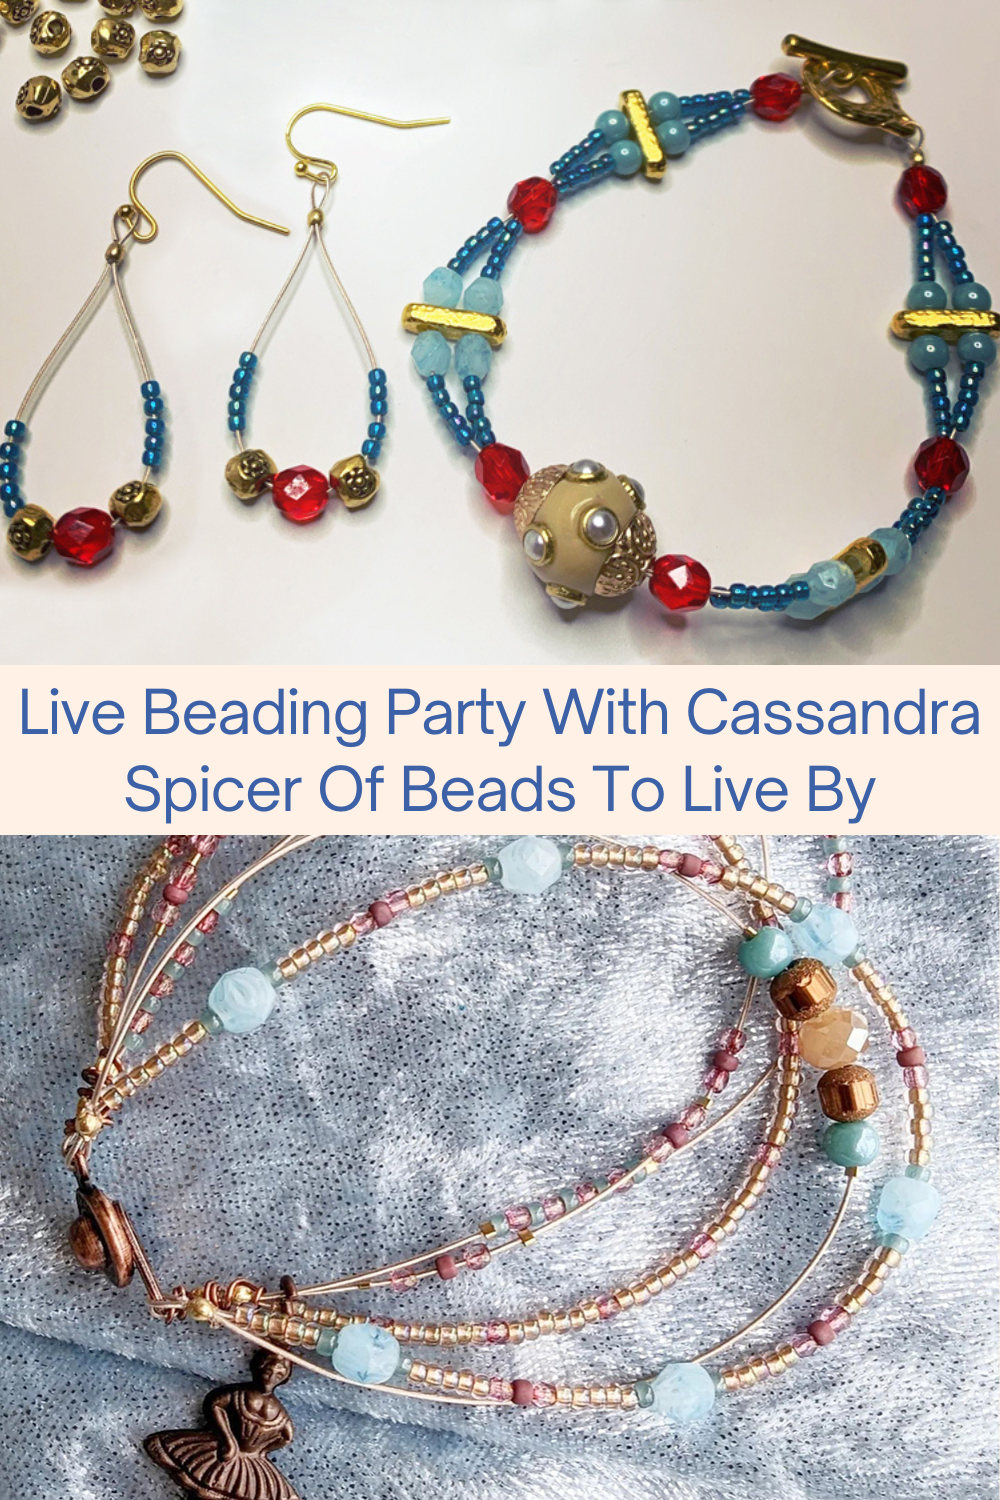 Live Beading Party With Cassandra Spicer Of Beads To Live By Collage